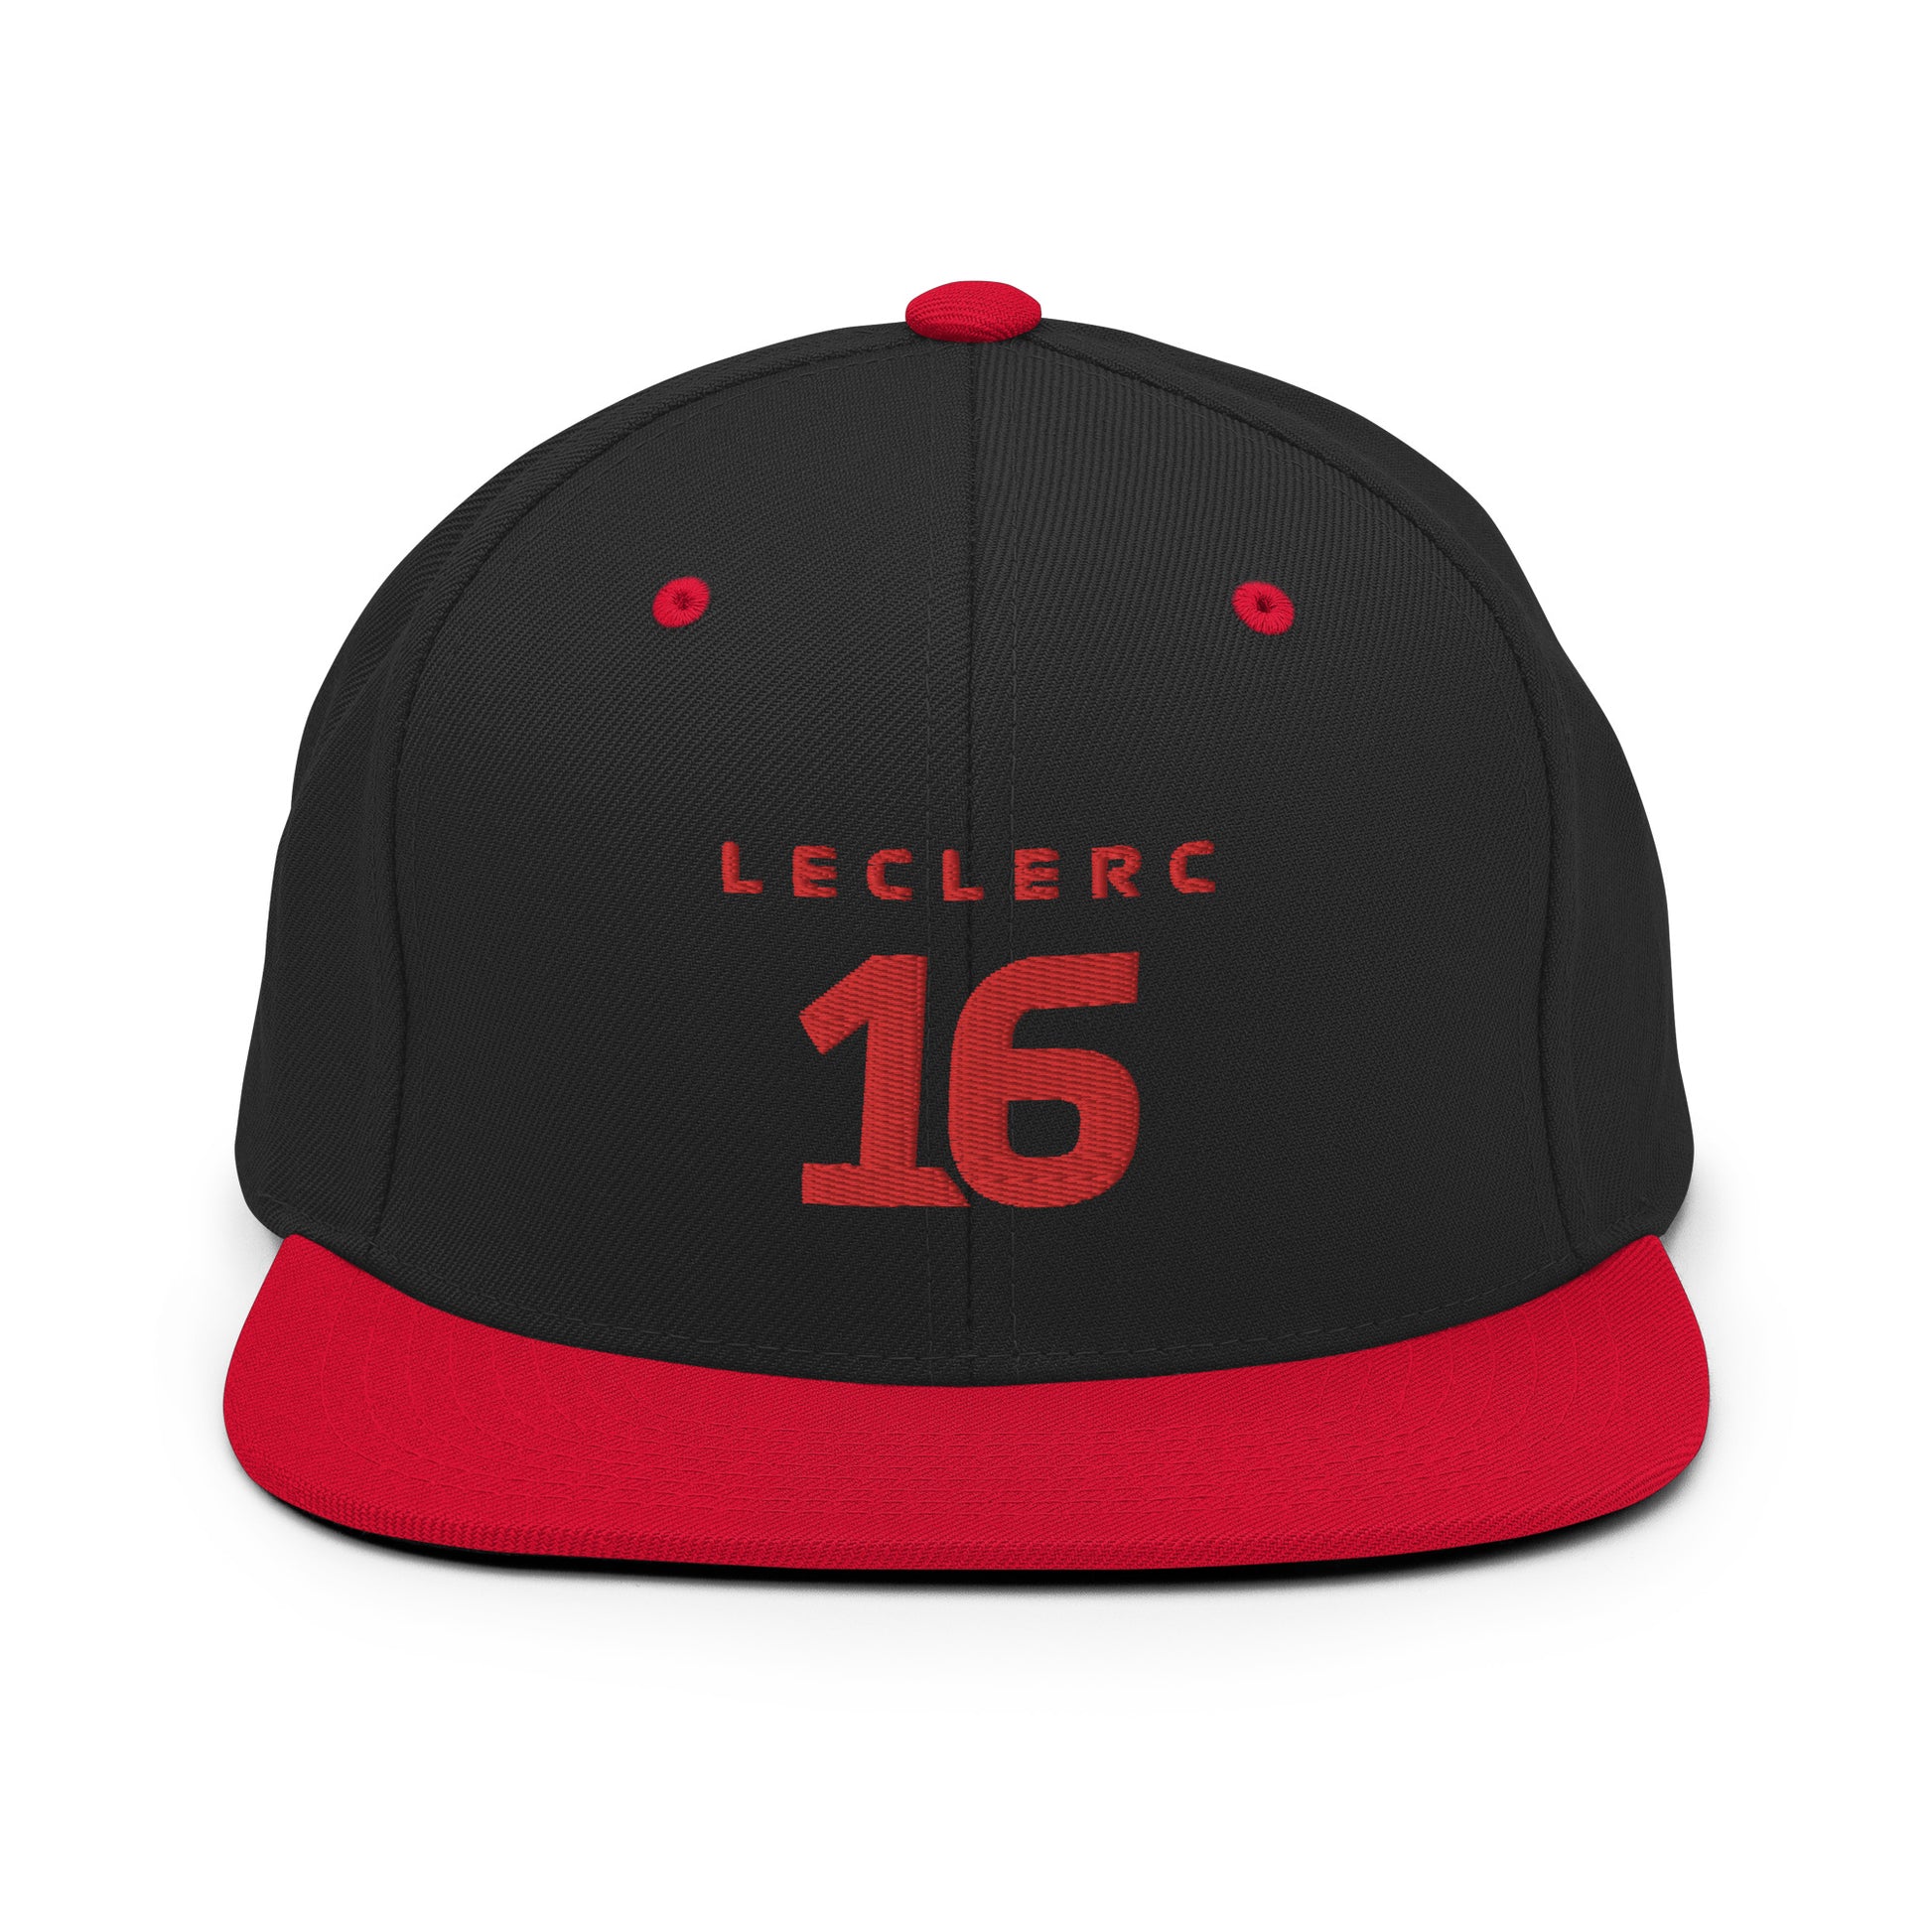 charles leclerc snapback hat black and red